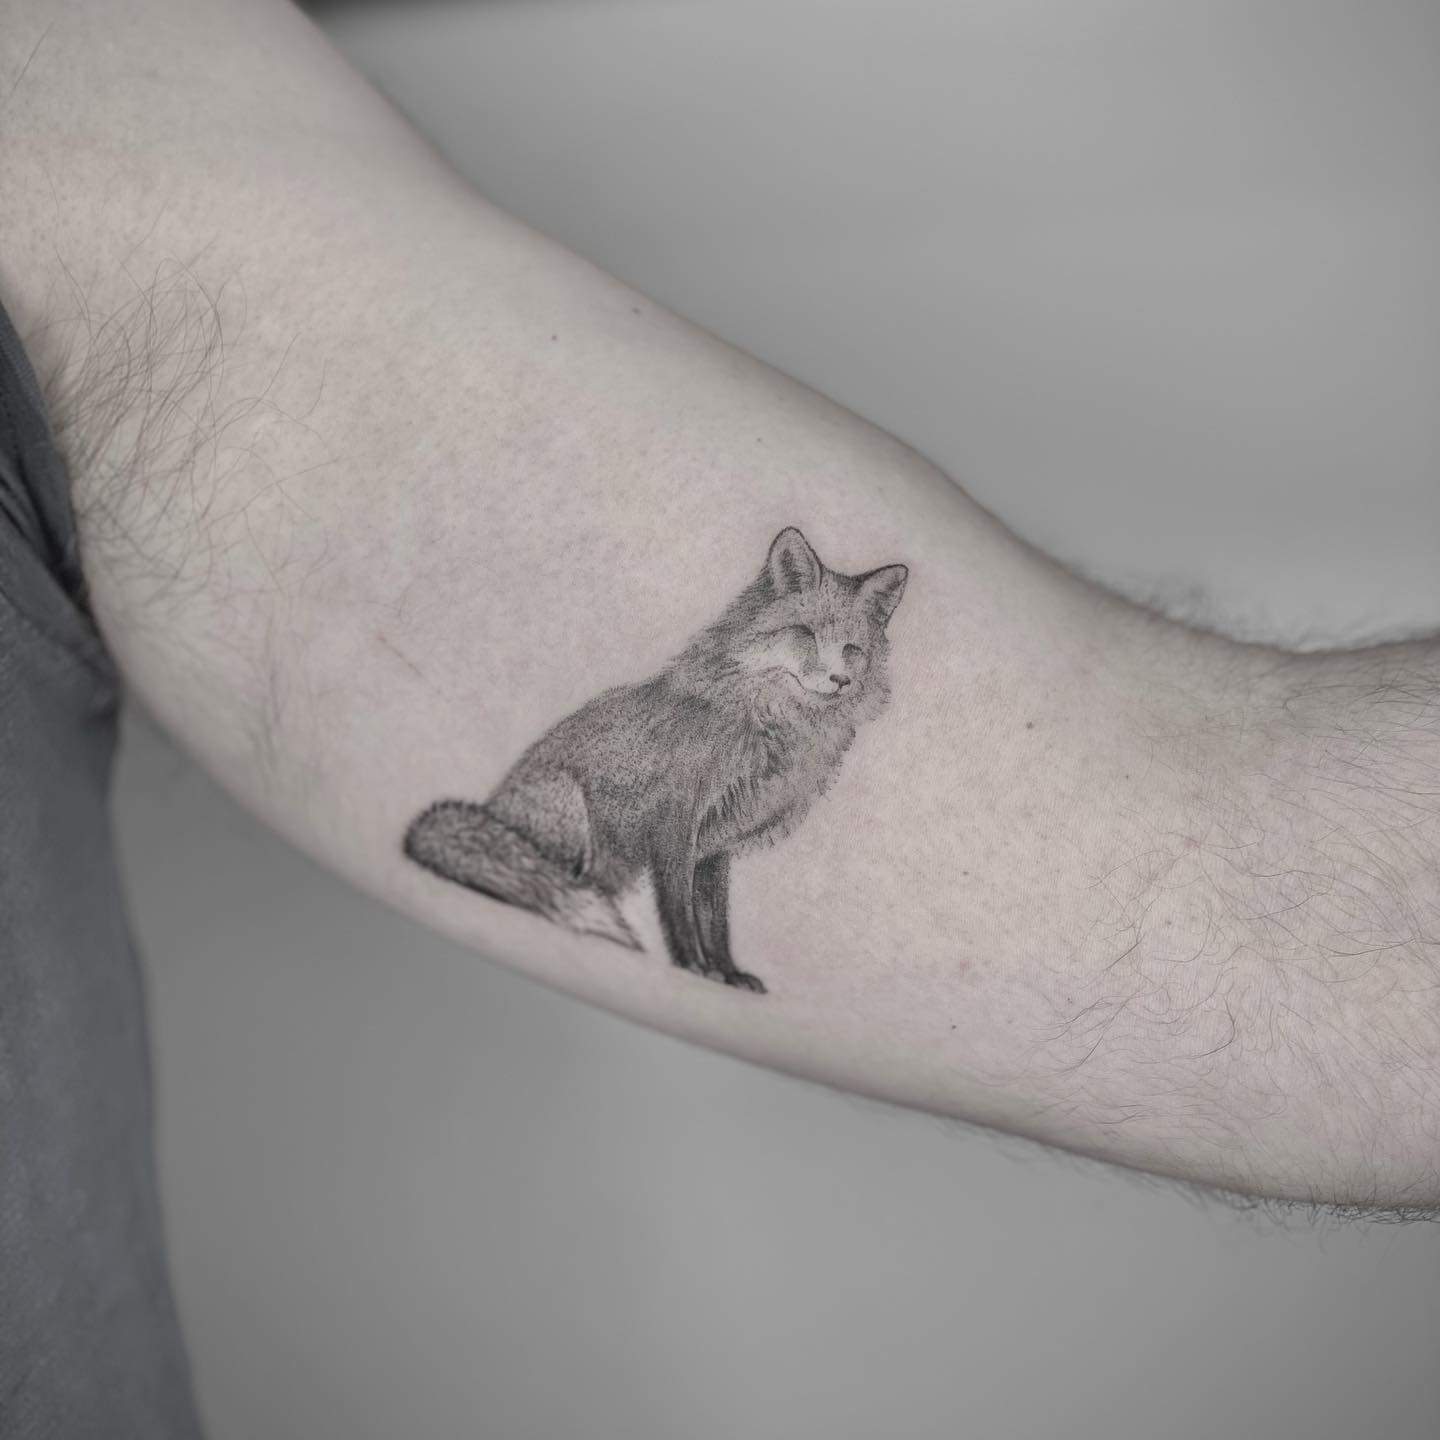 Black and gray fox tattoo by zap.ink